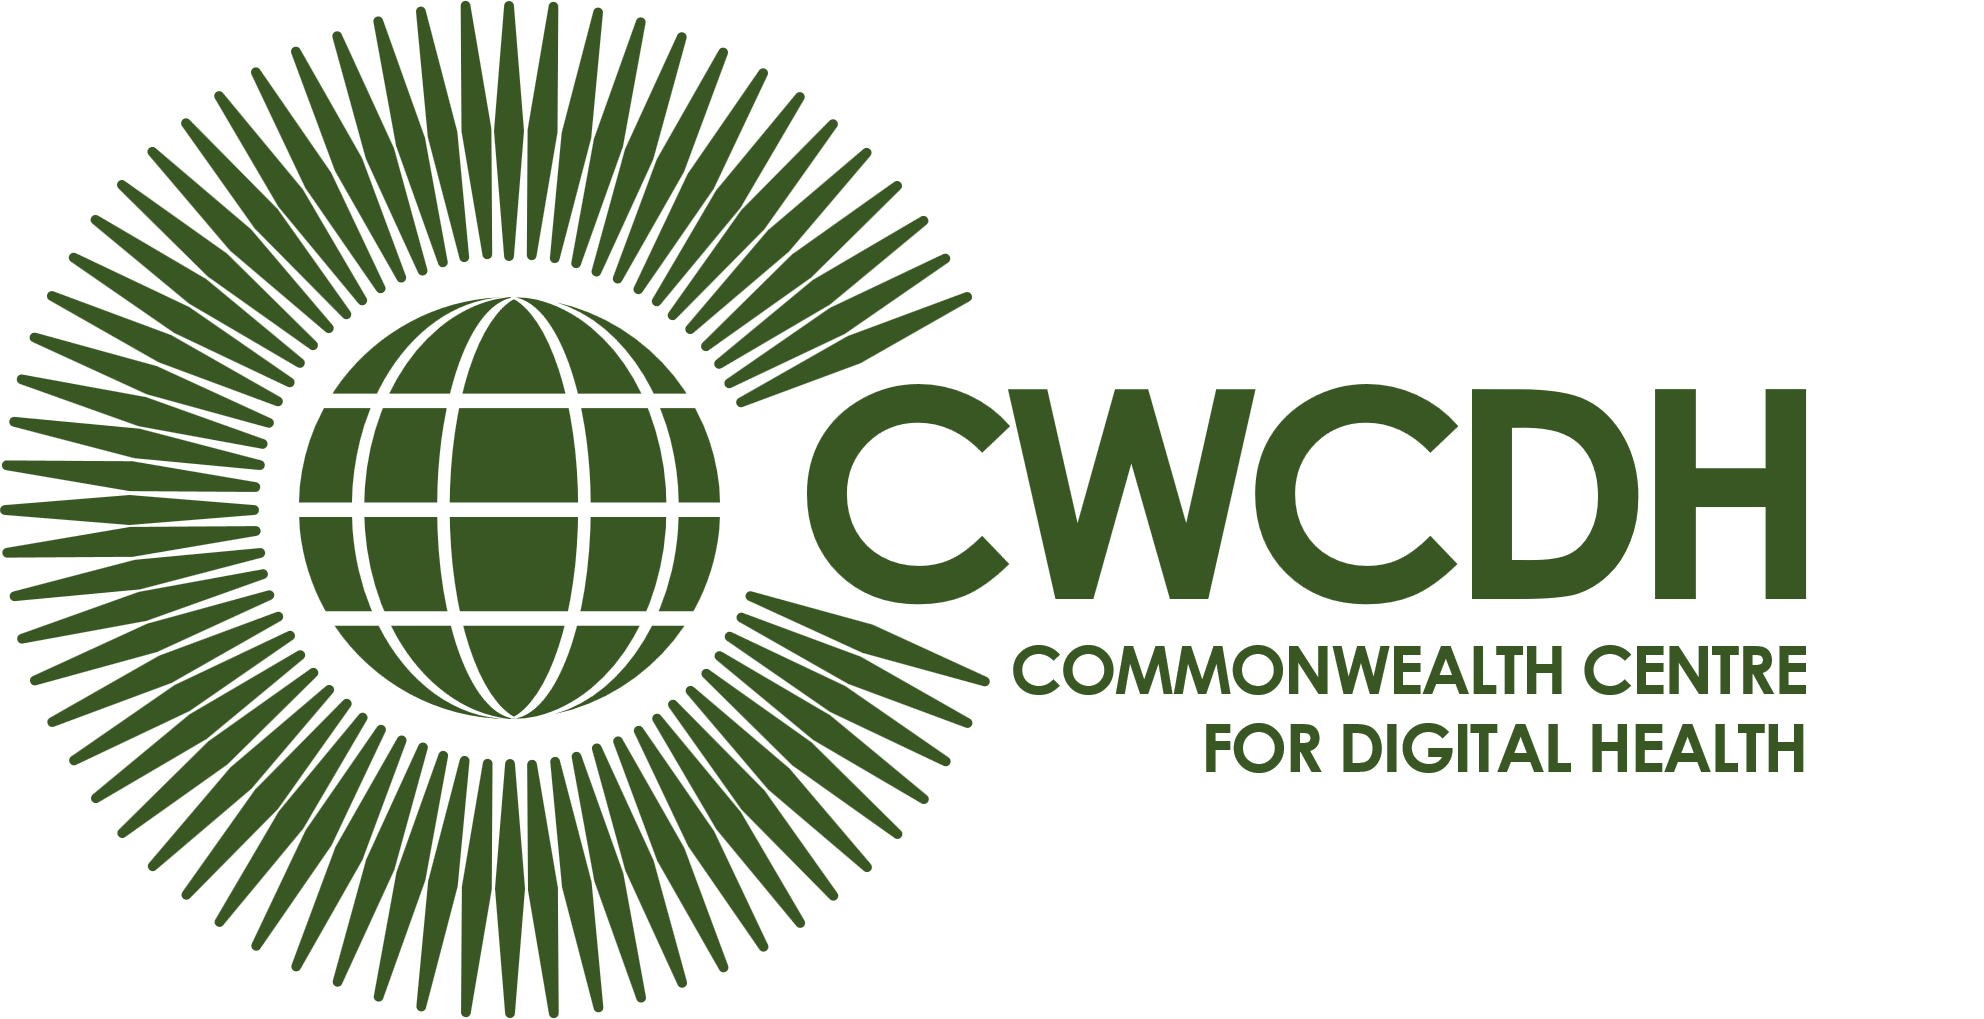 CWCDHLogo.png